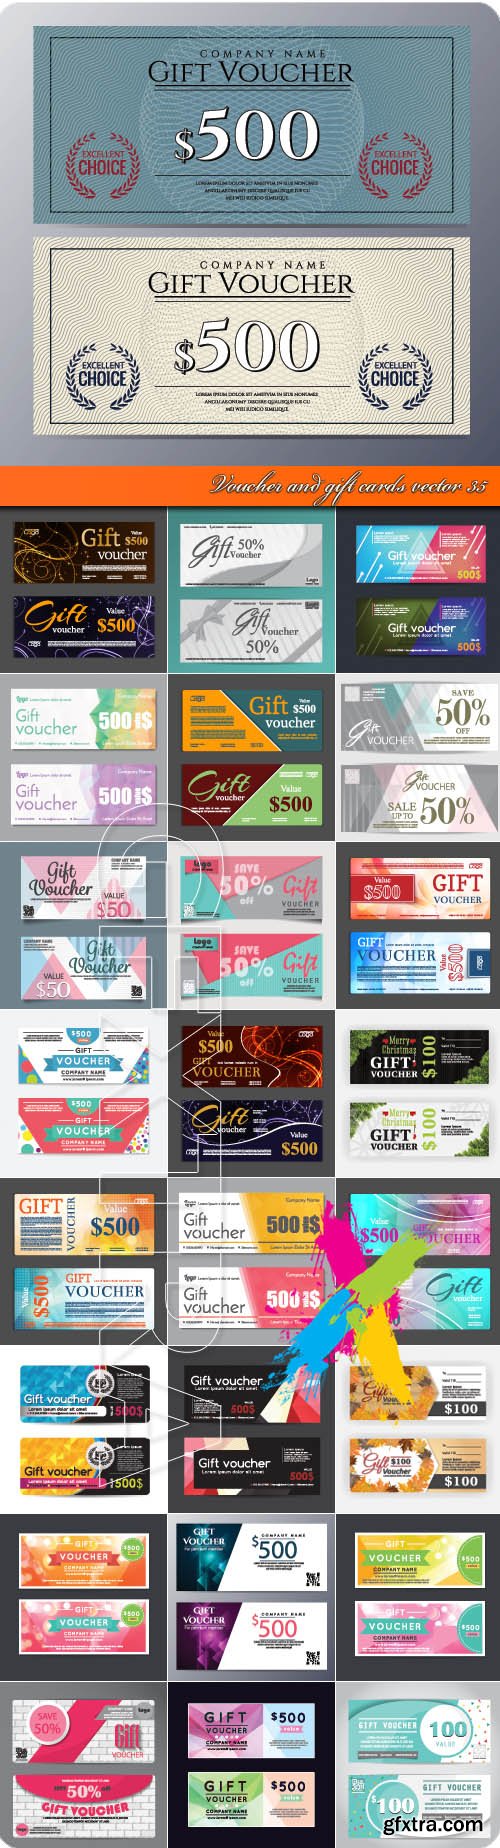 Voucher and gift cards vector 35